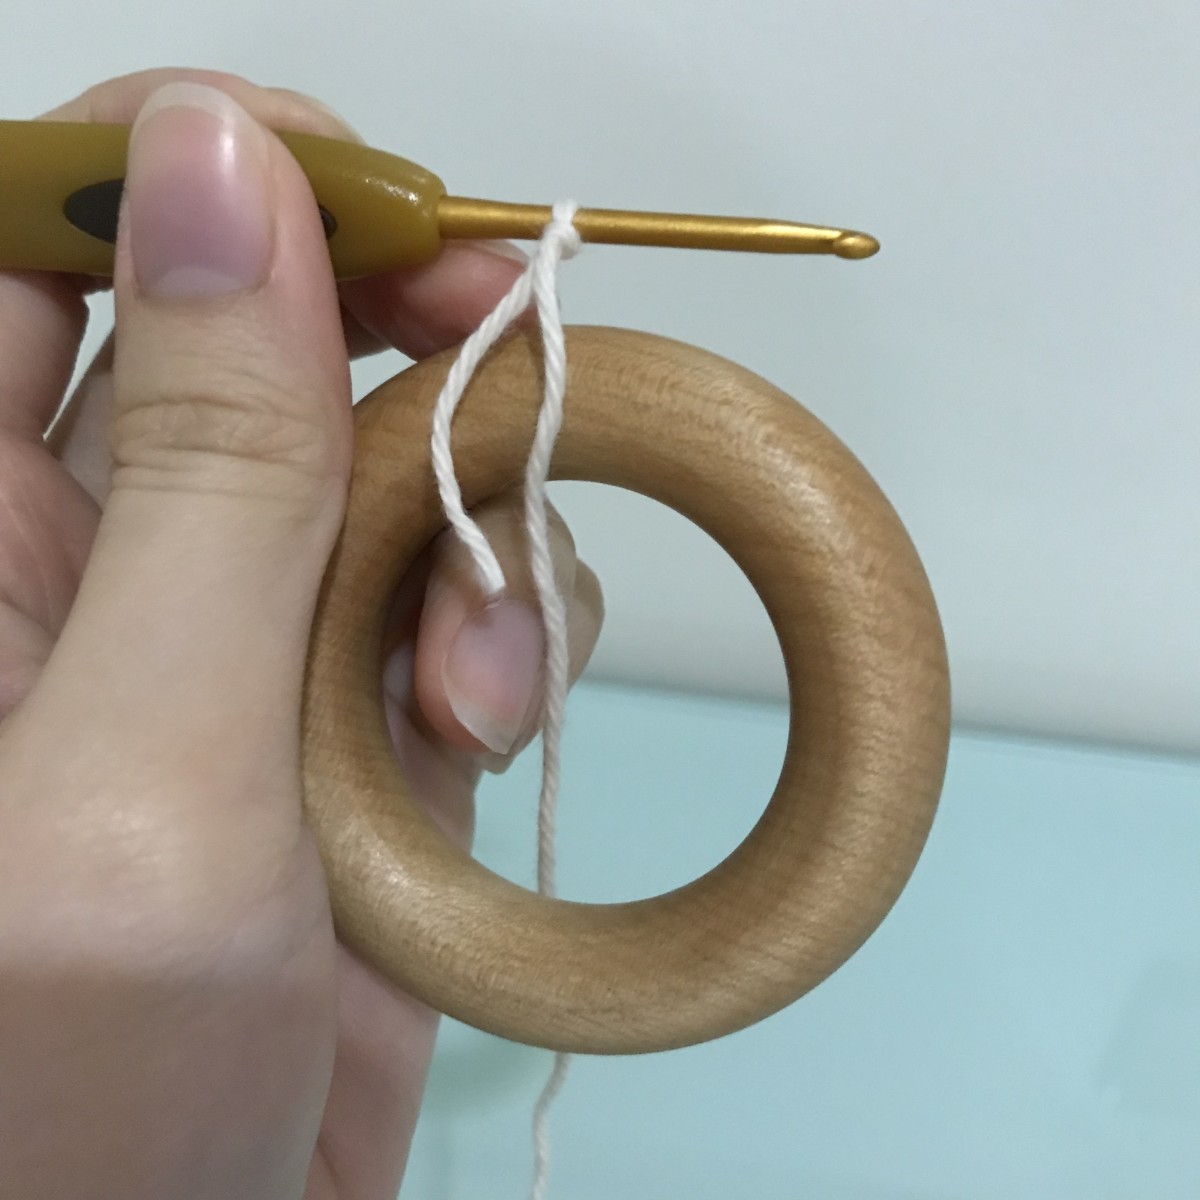 Pull hook above the ring to start working the stitches.